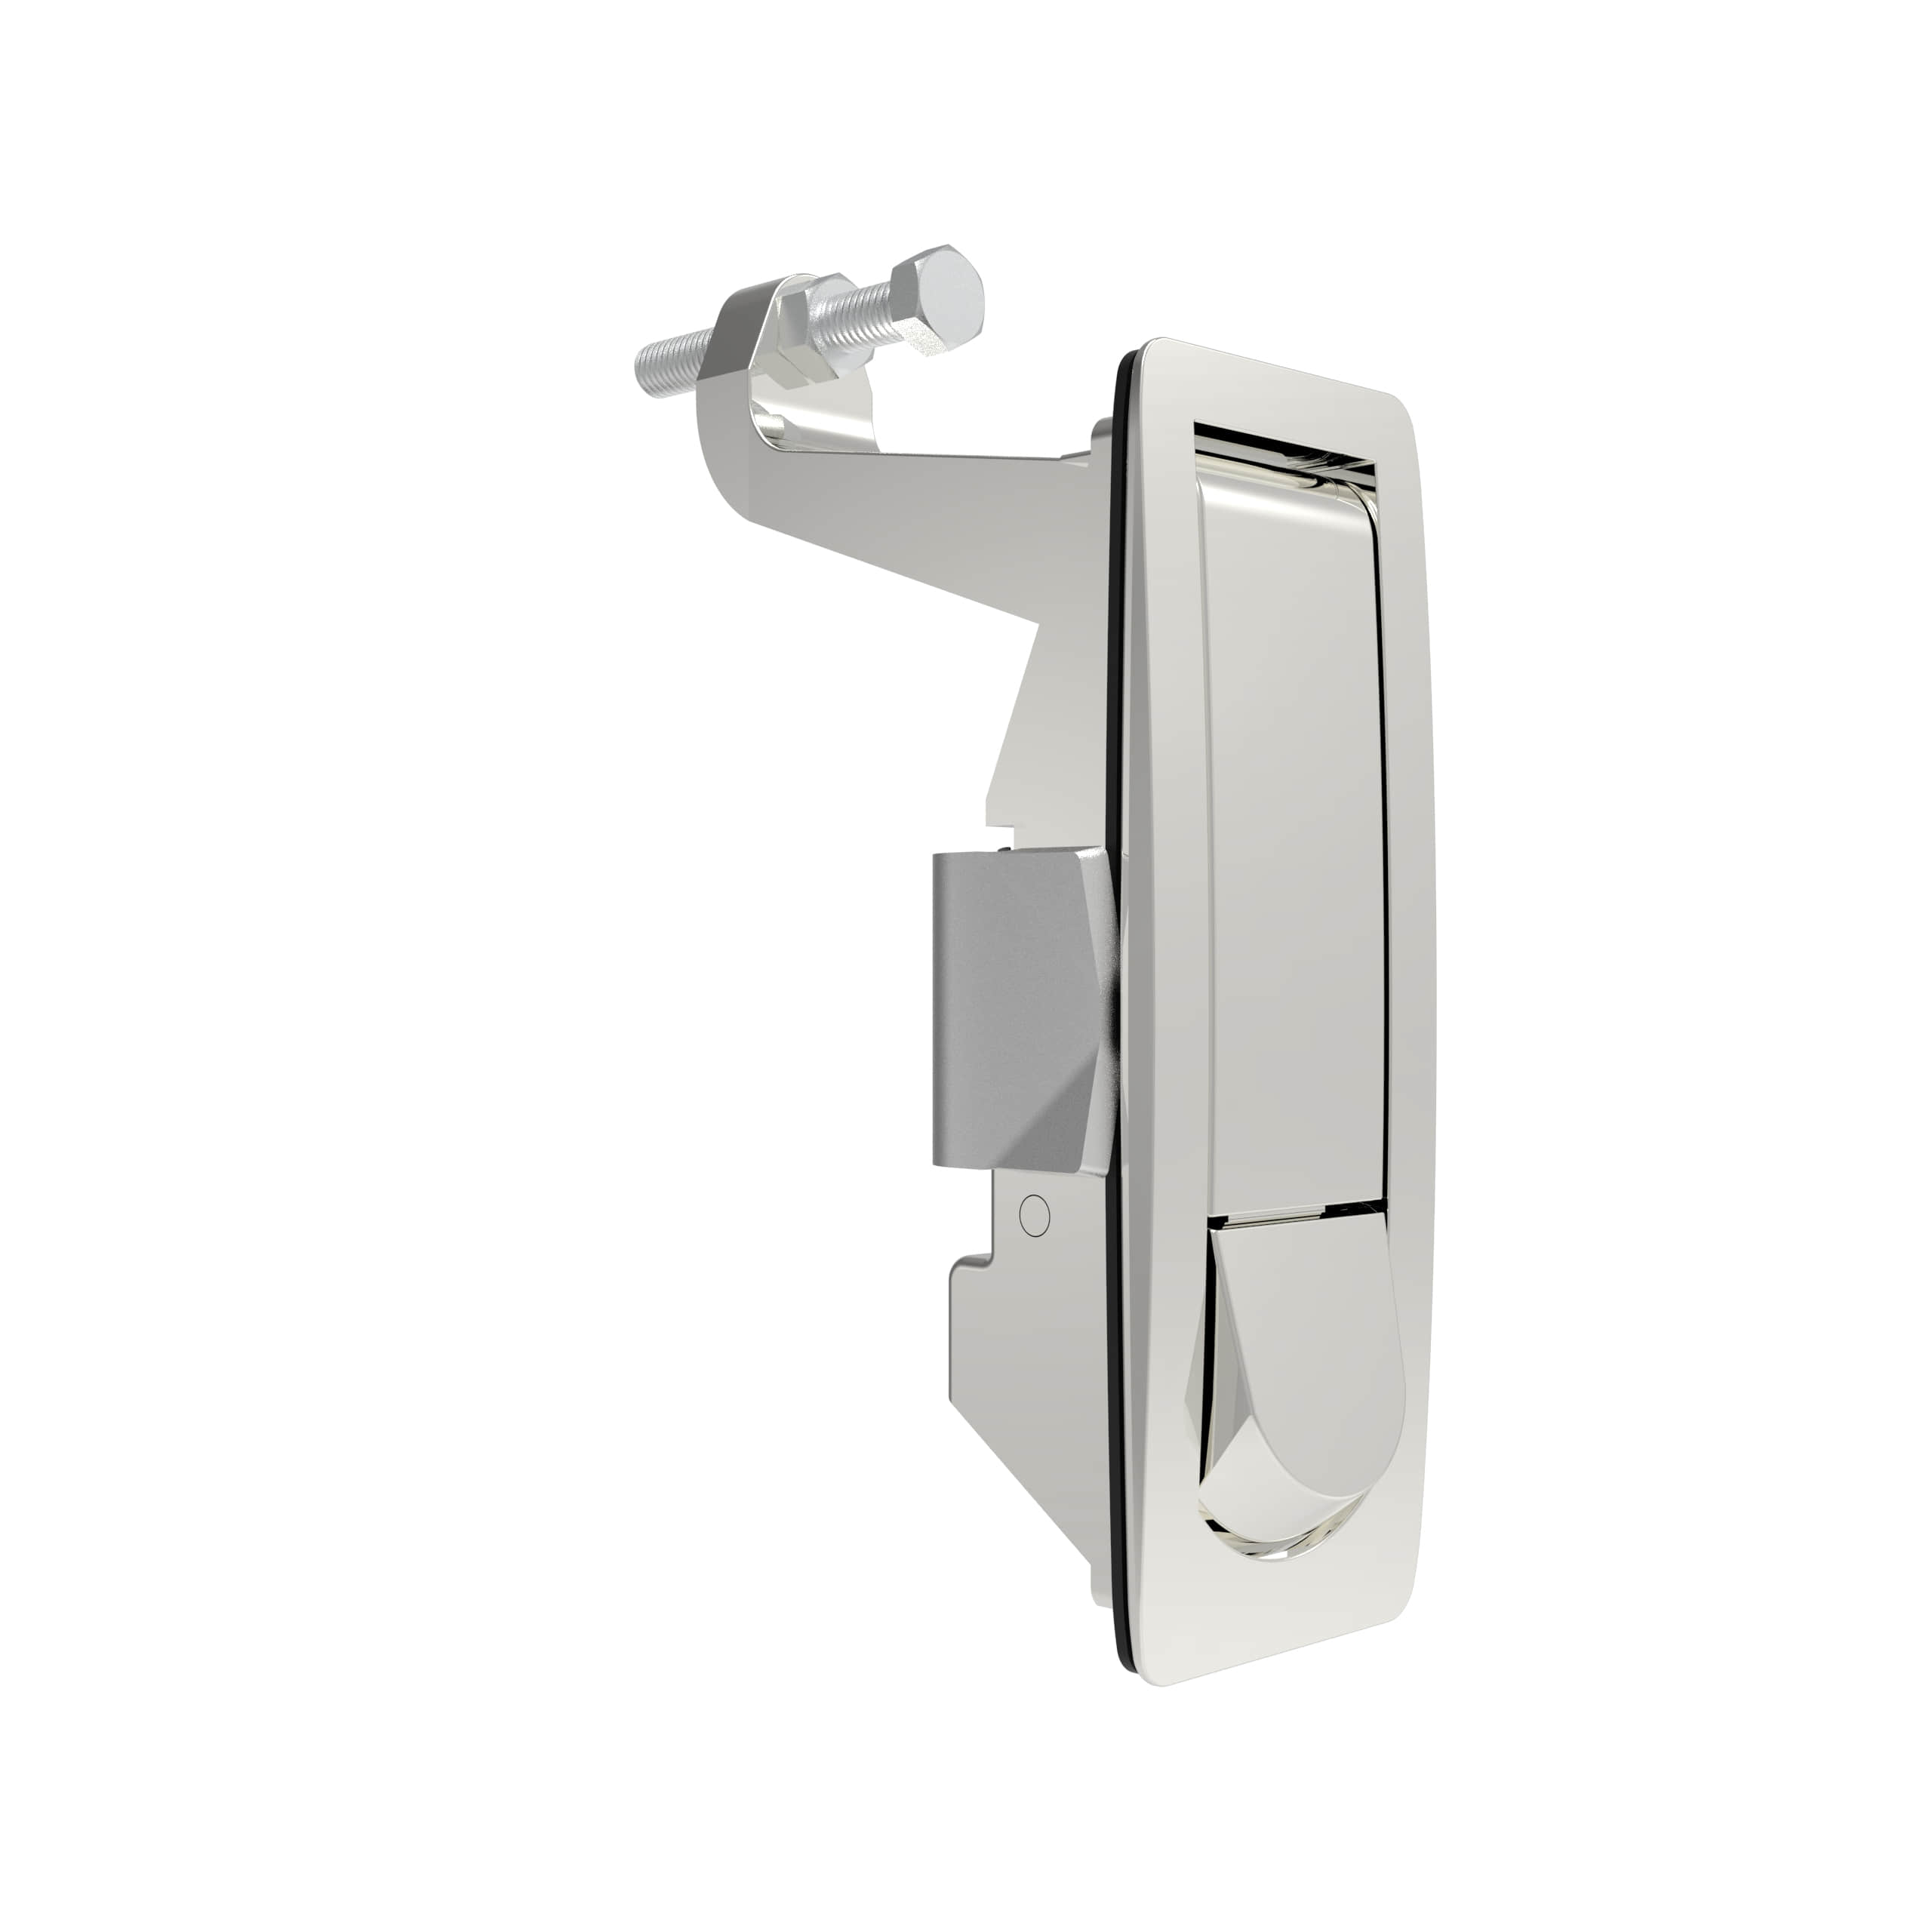 A-1442-146-30 | Compression door lock, lever, unlimited, raised trigger, unsealed, zinc alloy, electroplated chrome